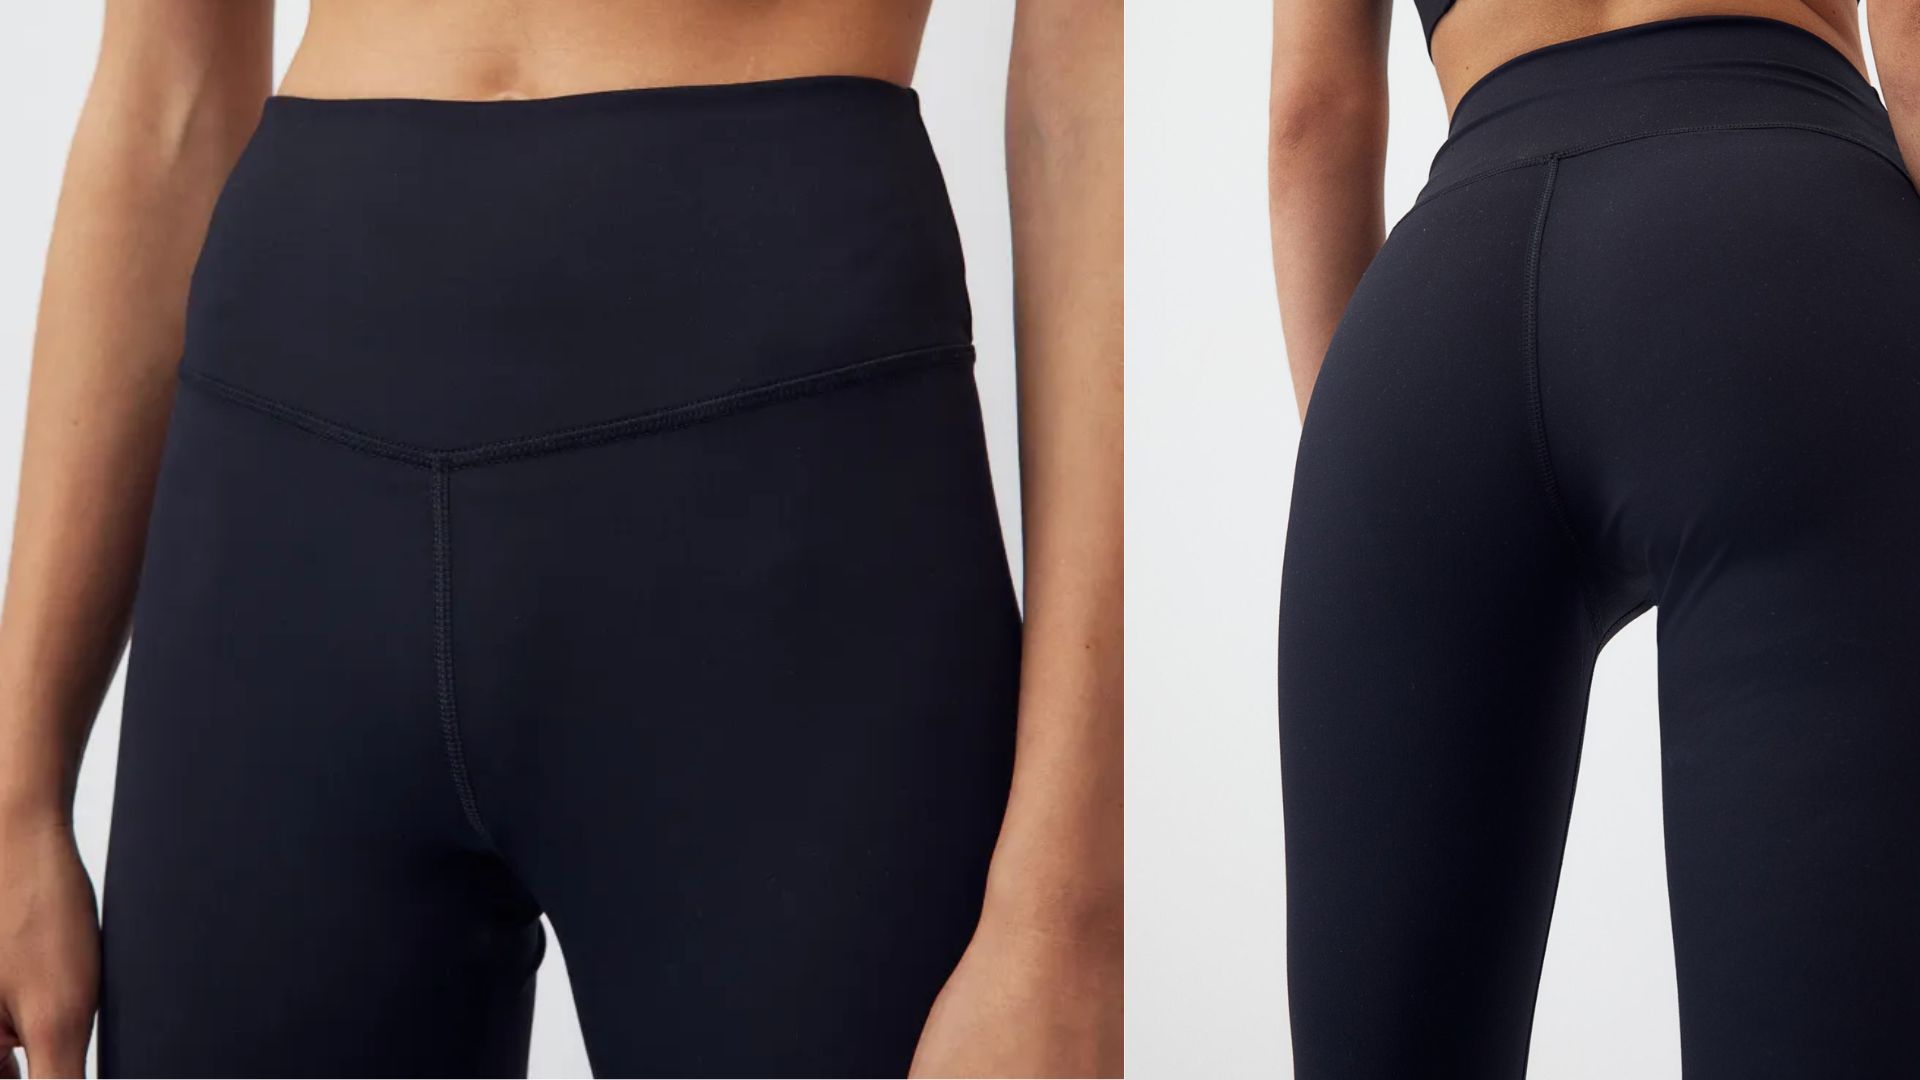 H&M SoftMove sports leggings in black from two points of view, front and back